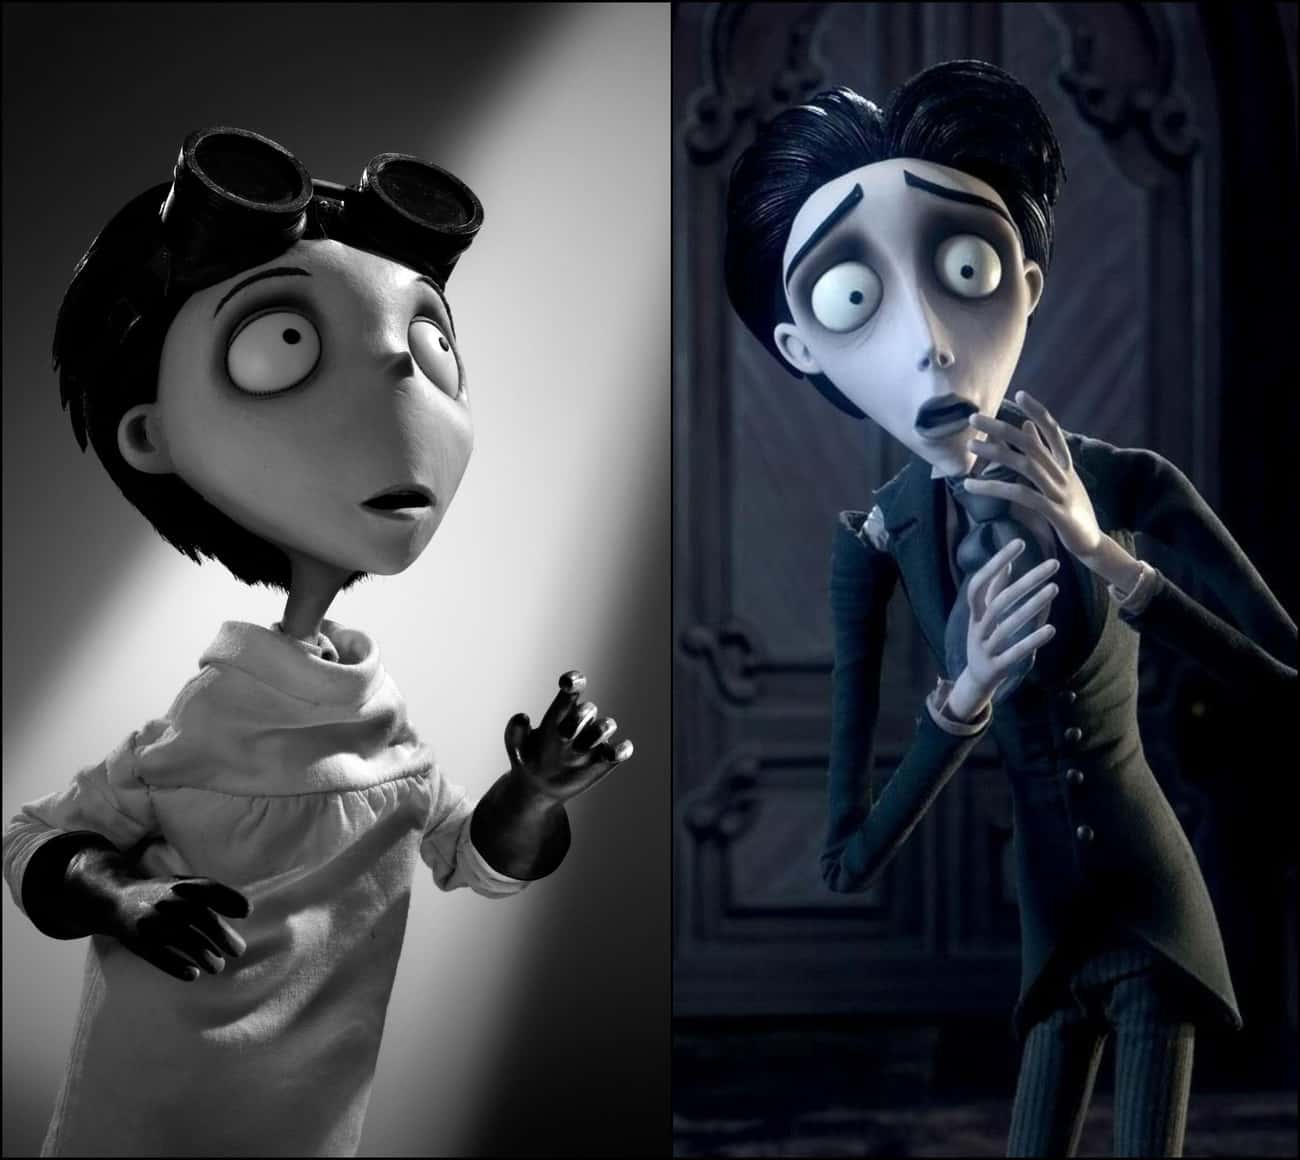 Victor Is The Same Character In ‘Corpse Bride’ And ‘Frankenweenie’